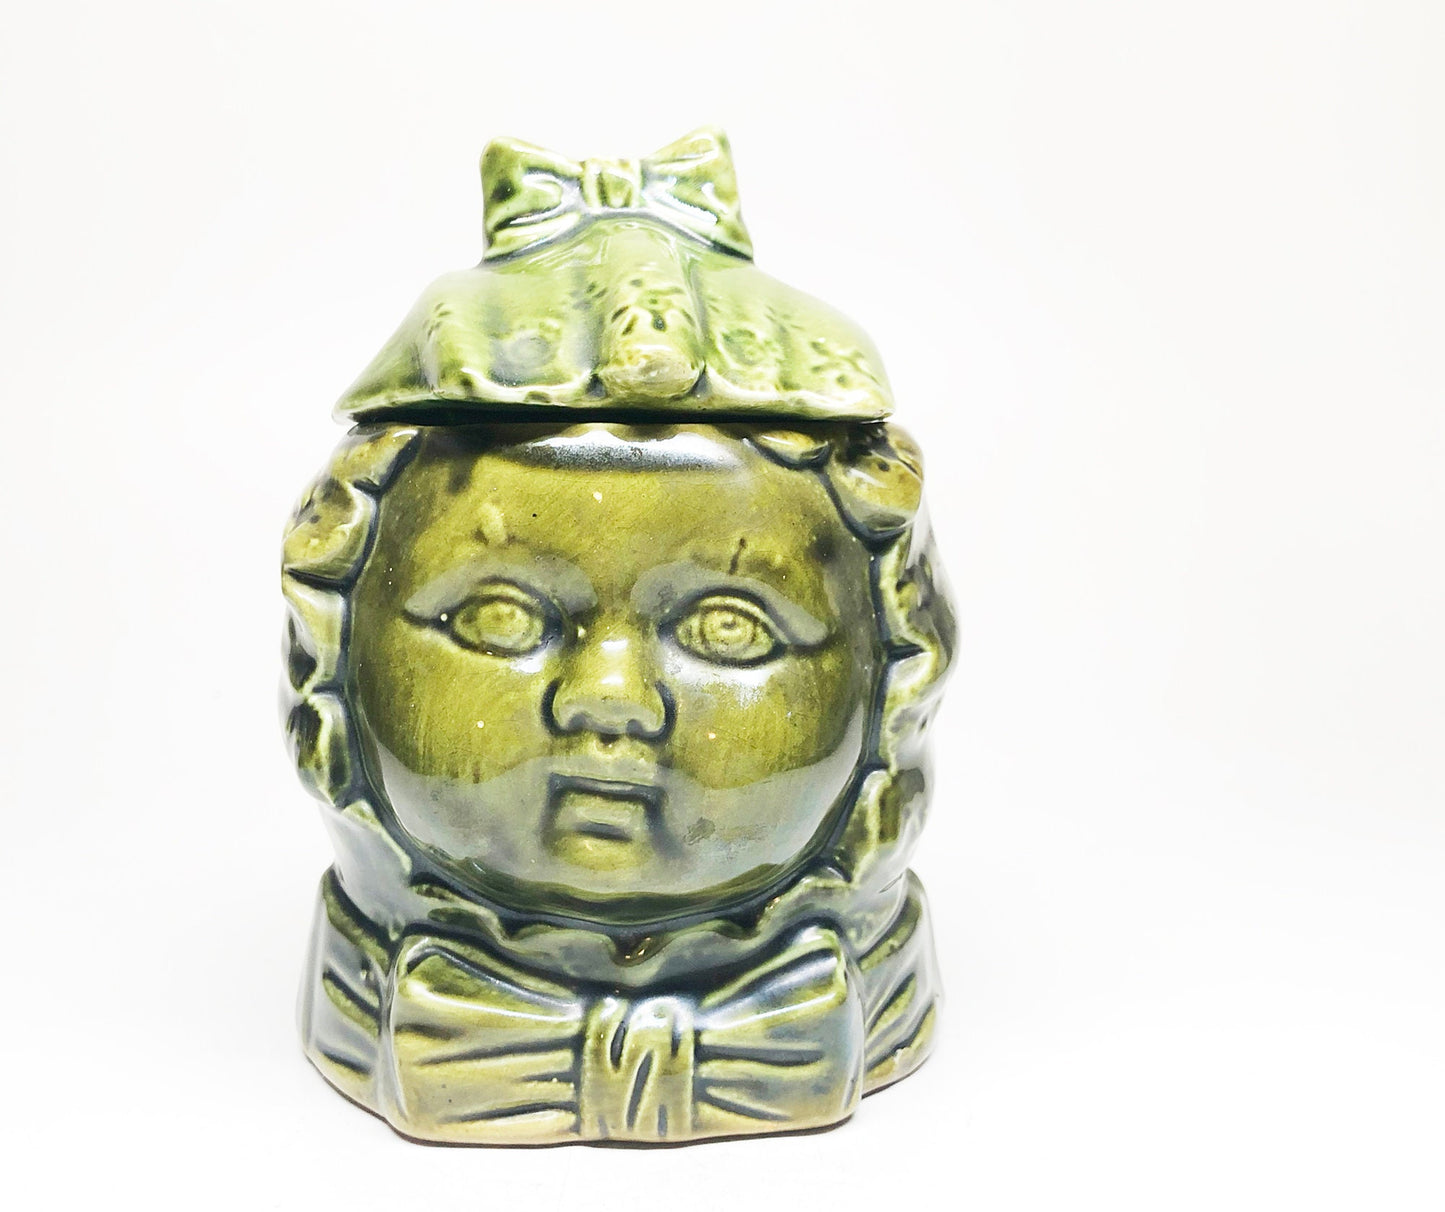 Early 1900s Two-Faced Crying Baby Green Tobacco Humidor